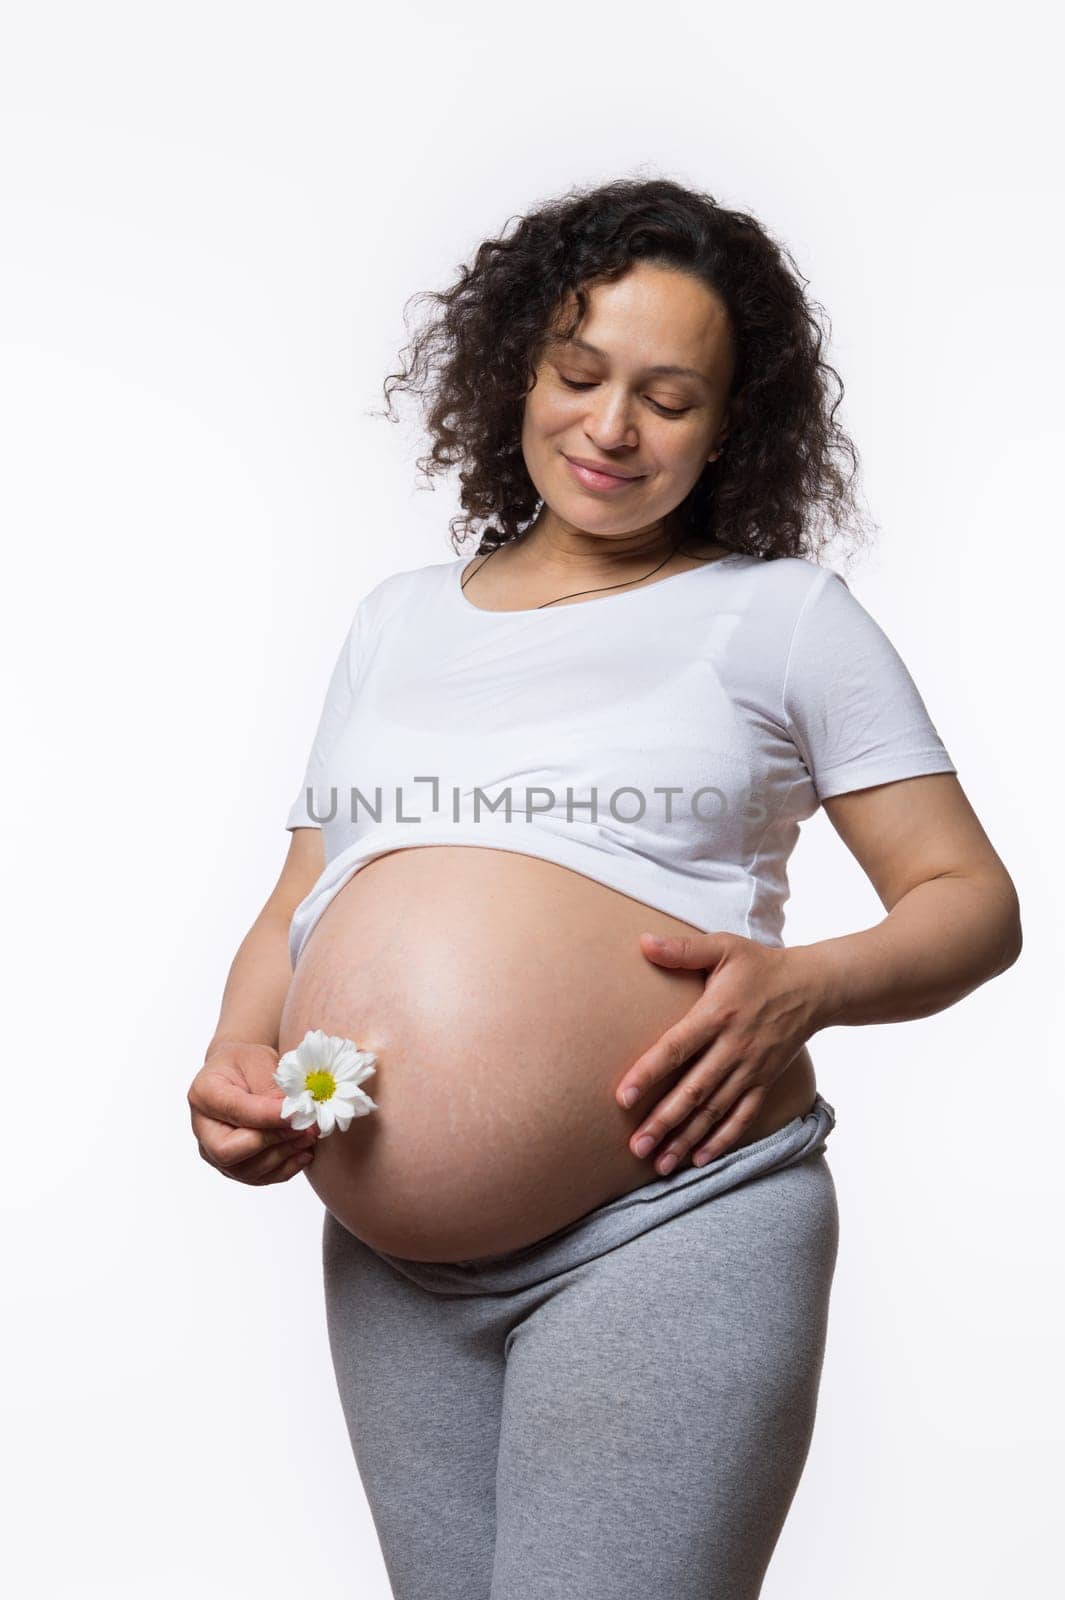 Charming smiling happy Latina gravid mother caressing her big pregnant belly in late pregnancy, holding daisy flower, isolated on white background. Women's health. Obstetrics and gynecology. Maternity